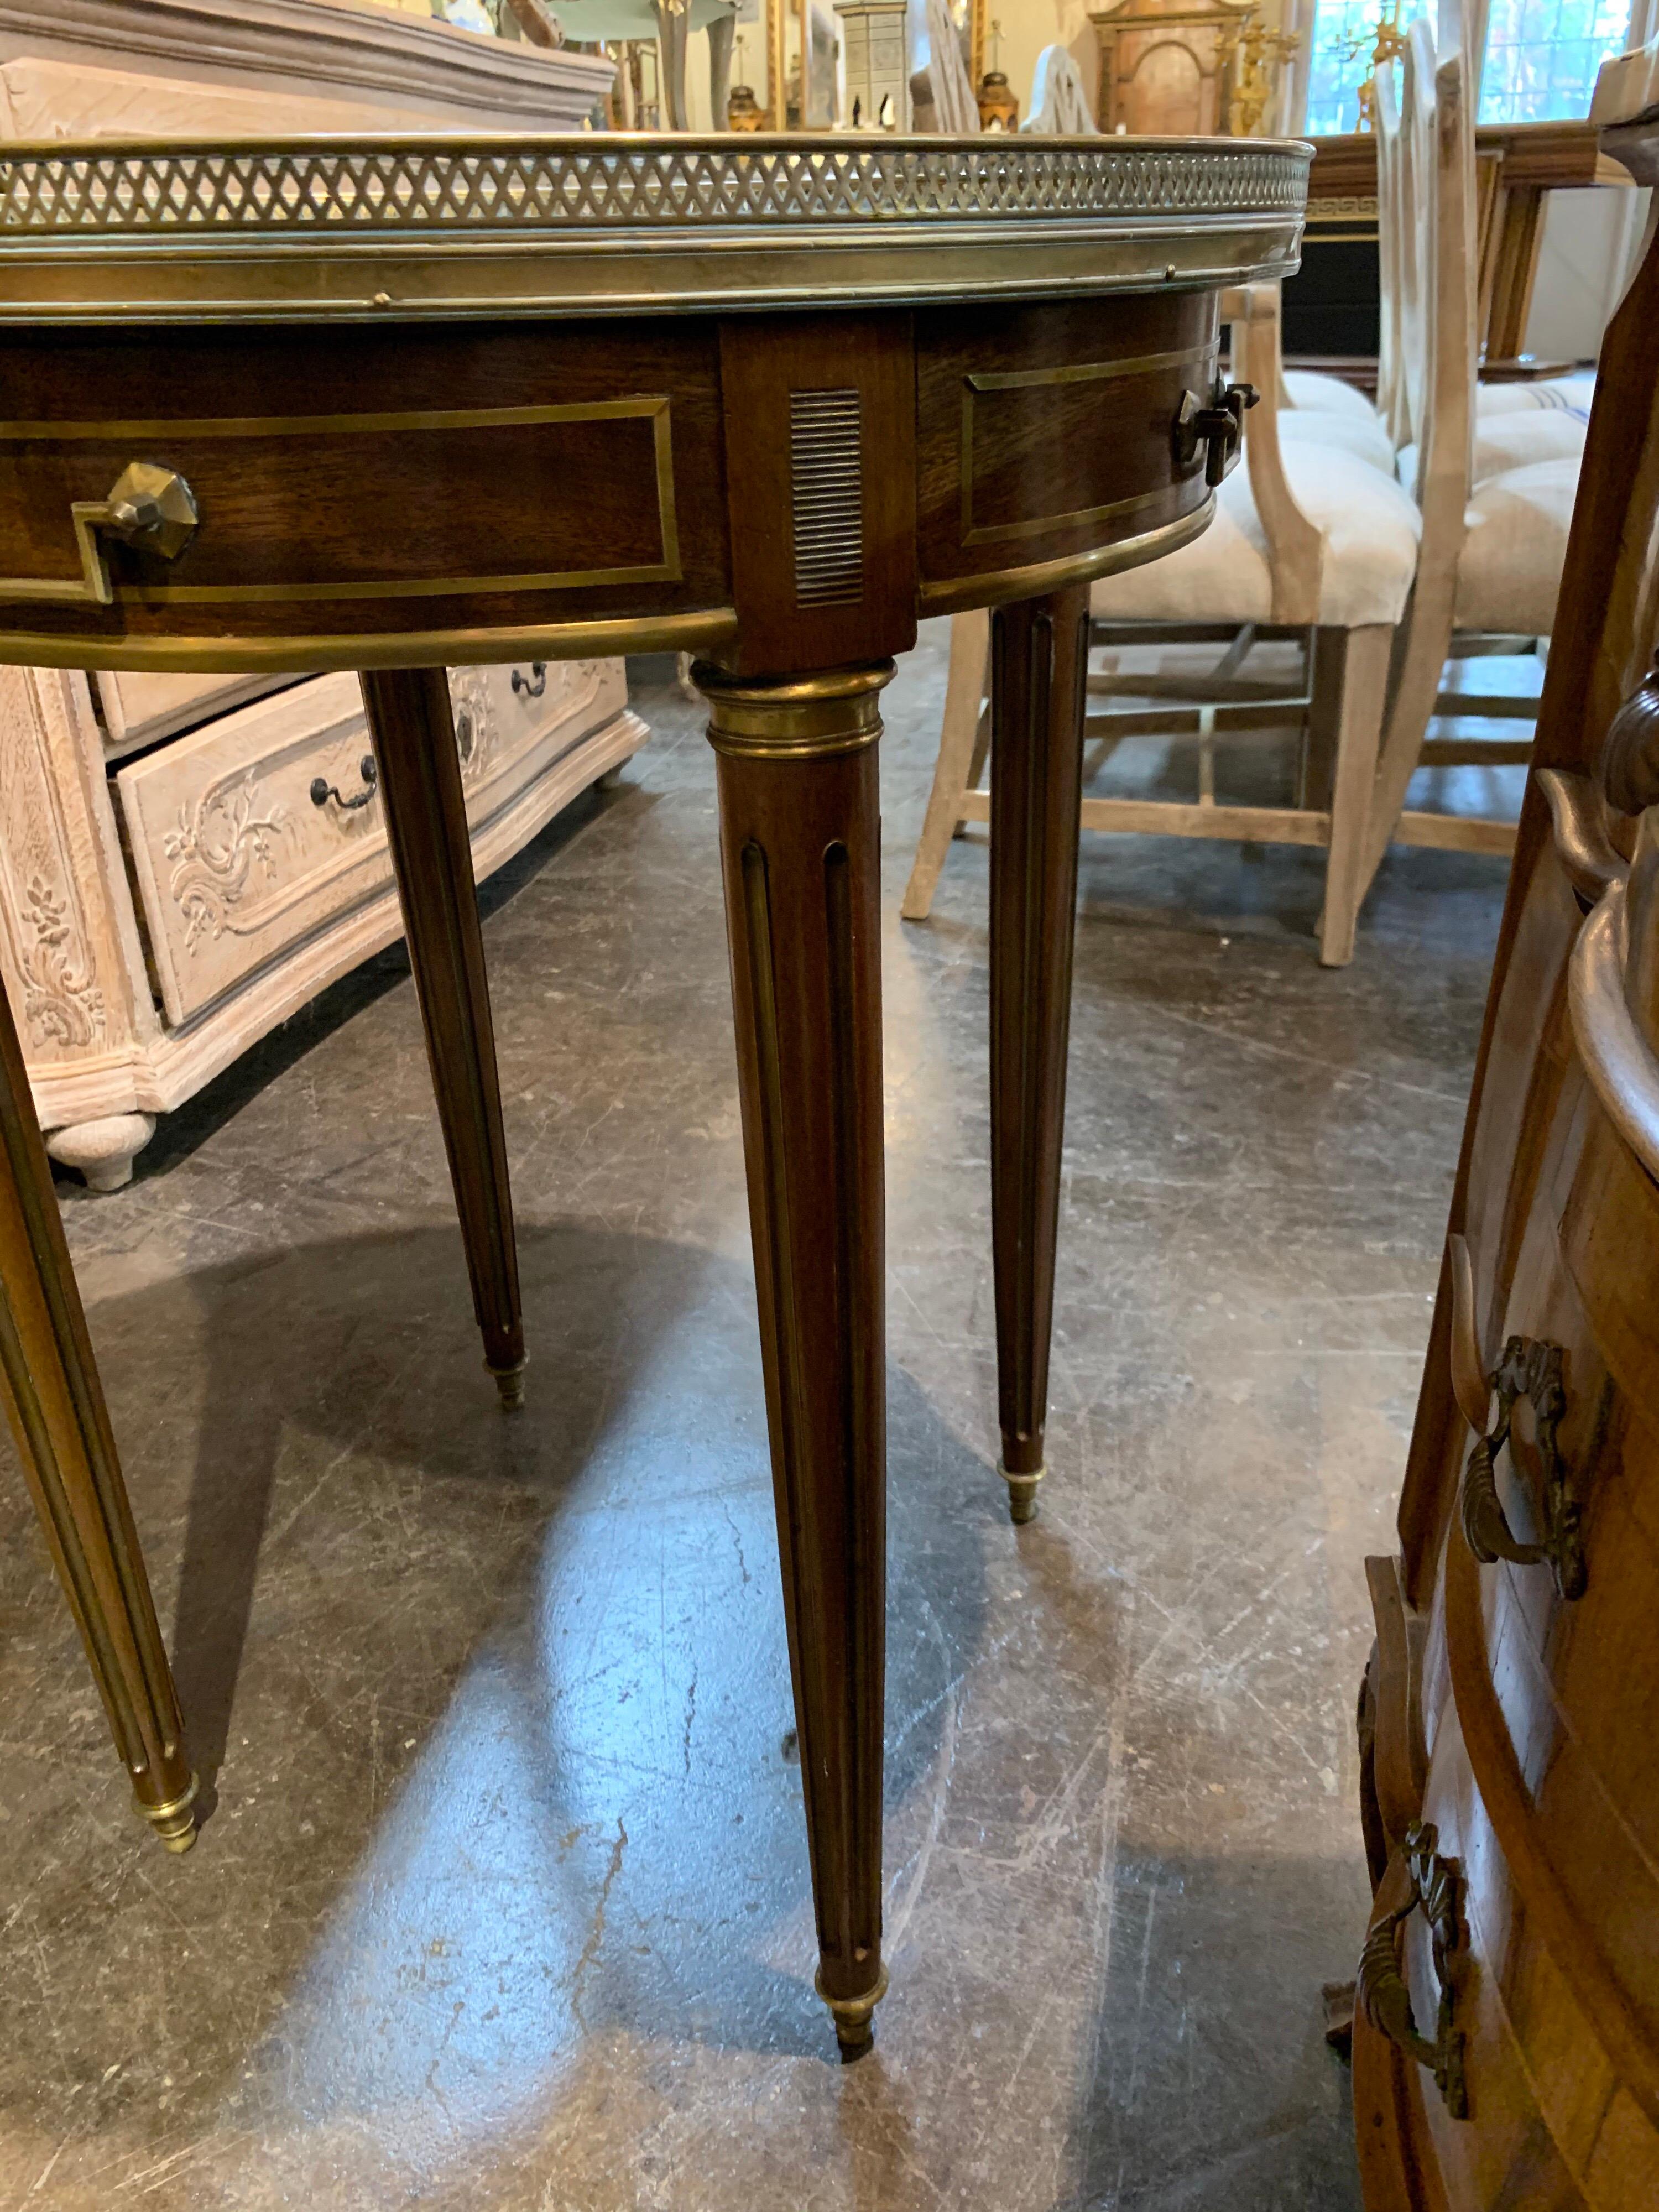 Beautiful French Directoire style mahogany bouiliotte table with mirrored top. Lovely brass details on the legs, drawers and top. A Classic table that makes a sophisticated statement!